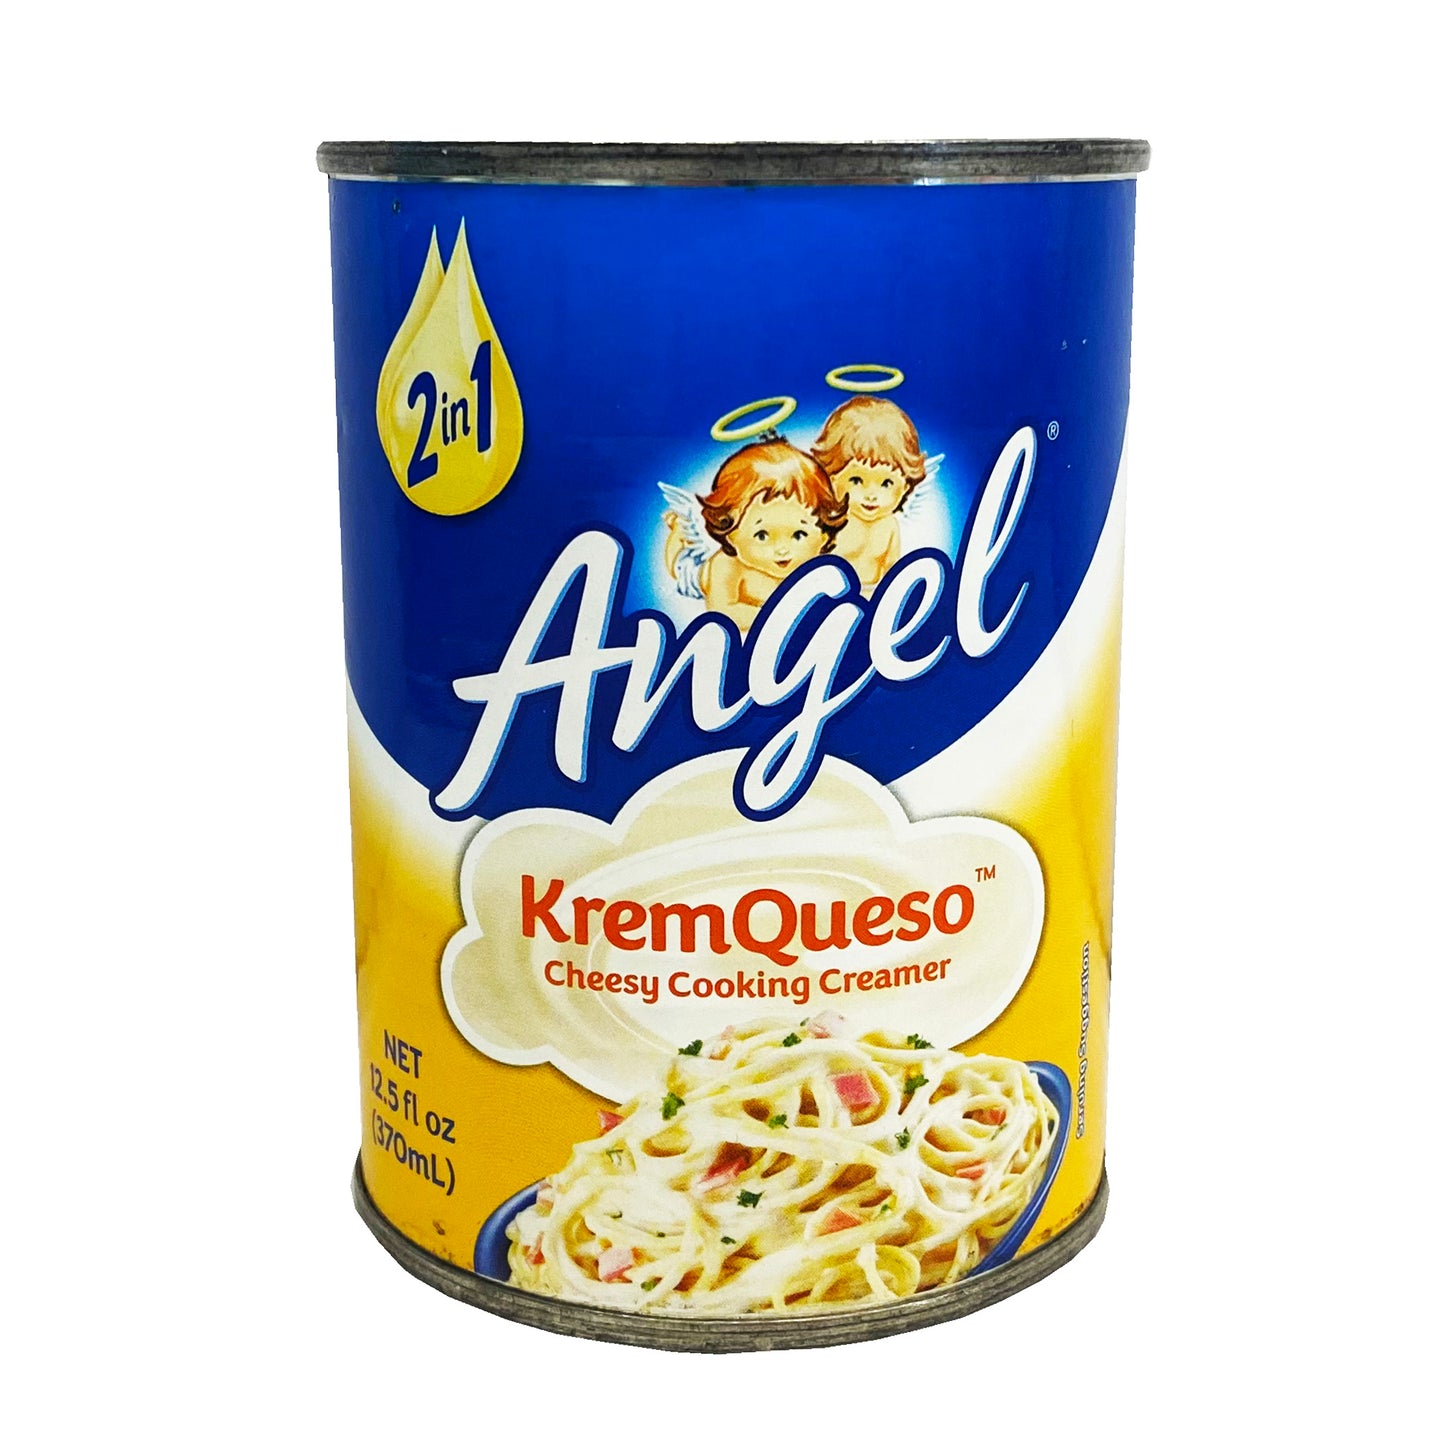 Front graphic image of Angel Cheesy Cooking Creamer - KremQueso 12.5oz